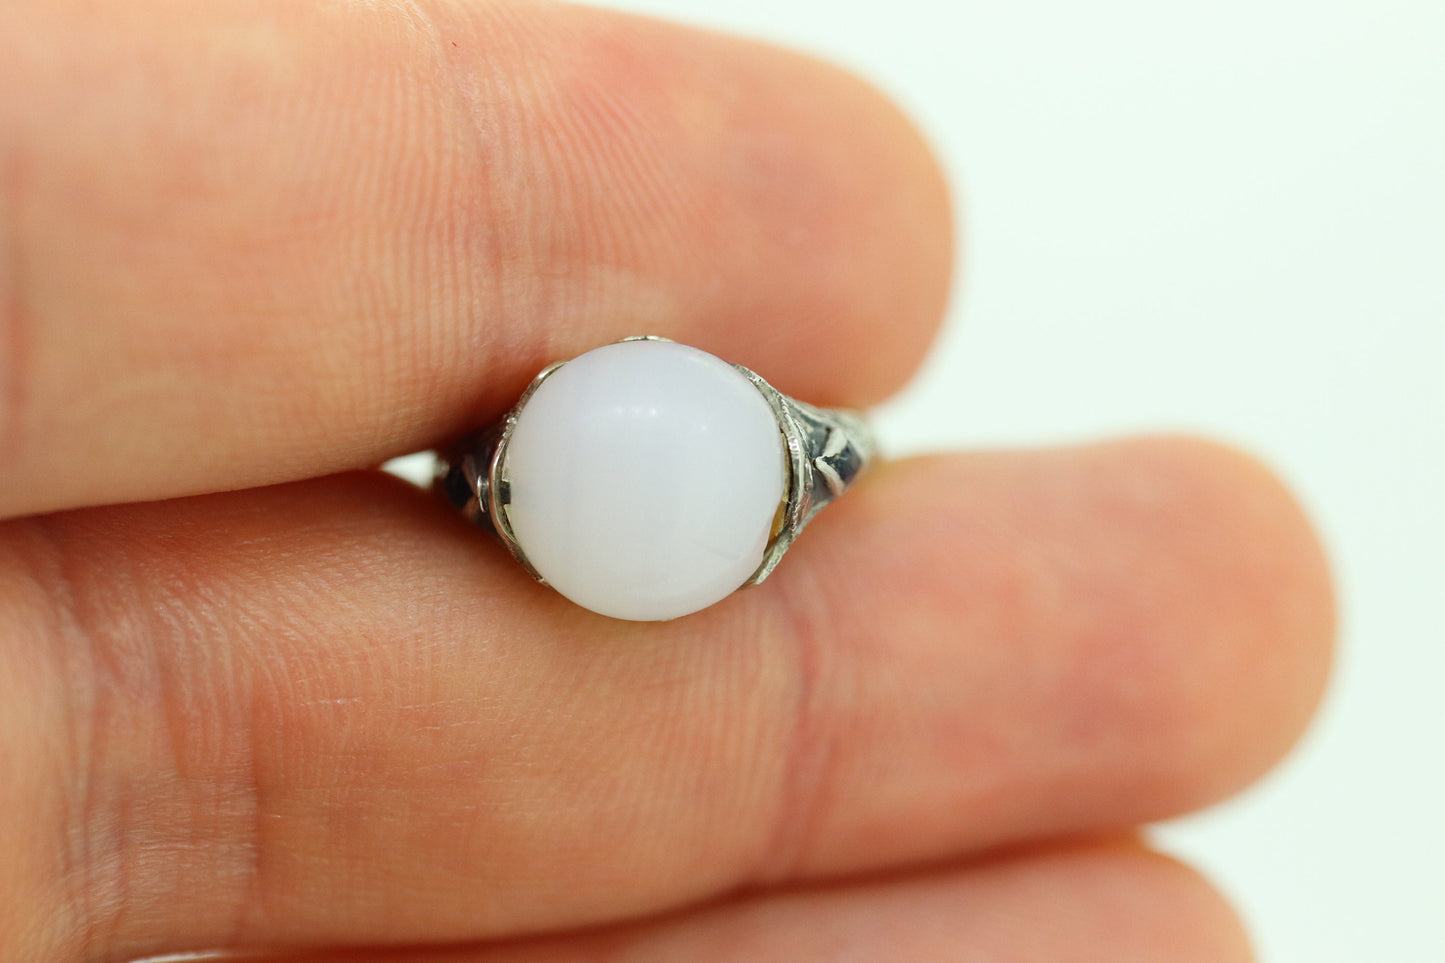 14k DELTAH MOONSTONE and Sapphire ring. White Gold Engraved with Sapphire and White Moonstone ORB sphere cabochon ring. st(30)